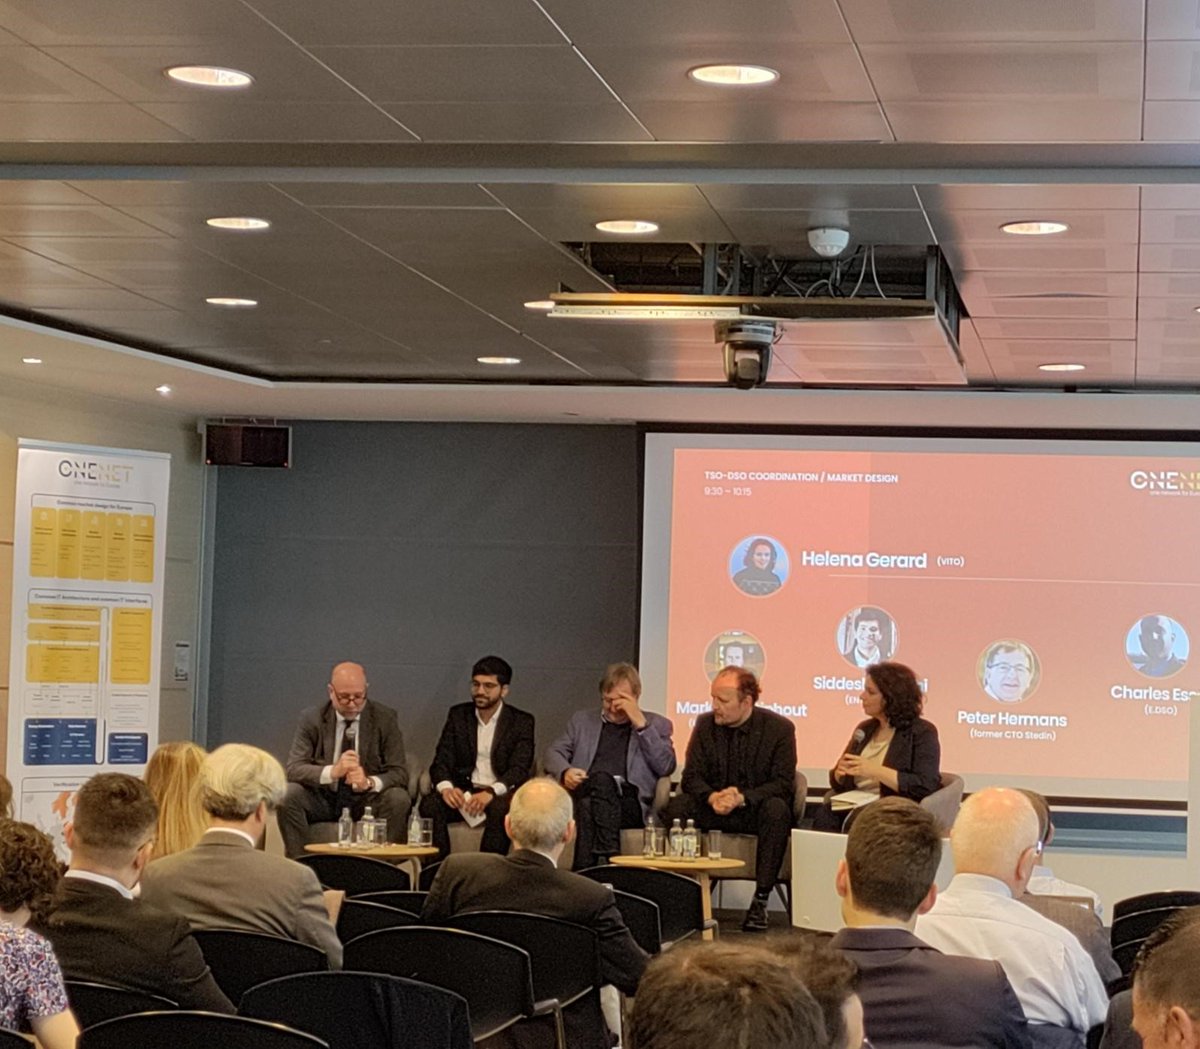 E.DSO SG, Charles Esser, participated in @OneNetProject event panel discussion on #TSO-#DSO coordination and market design. He applauded the good progress of network operators in profiting #digitalisation of #grids and enabling participation of #consumers in #EnergyMarkets. ⚡️